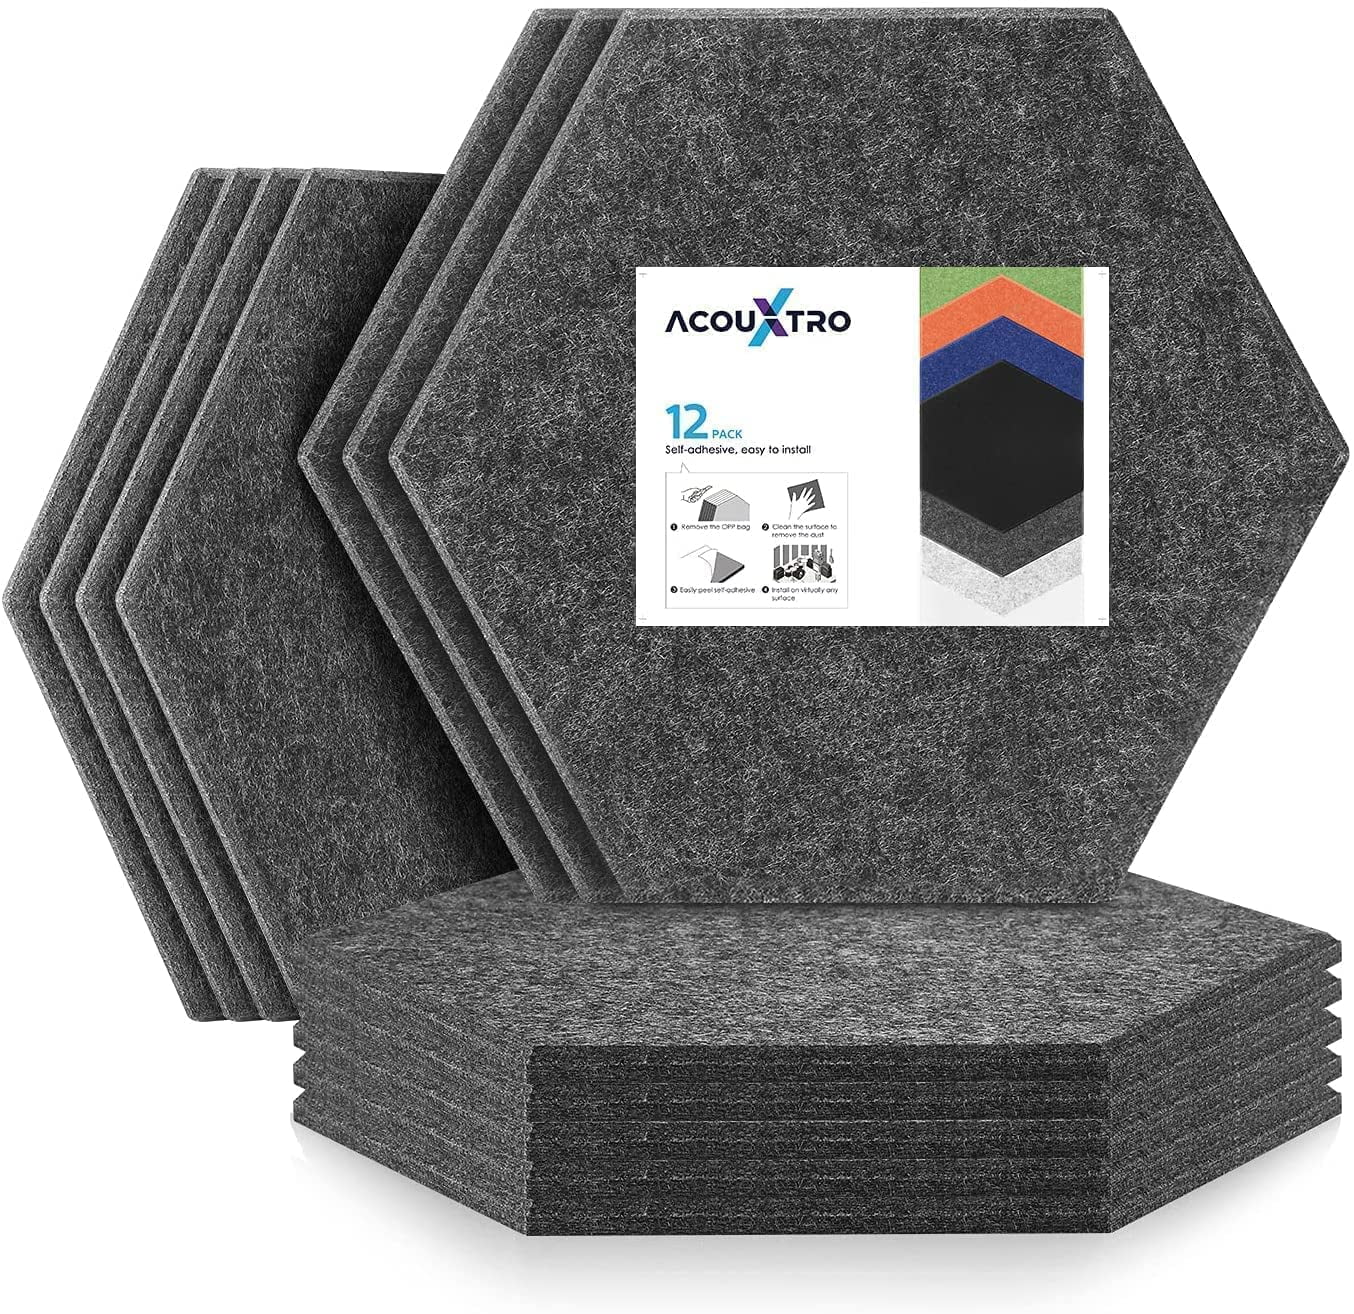 12 Pack Hexagon Self Adhesive Acoustic Panels Sound Absorbing